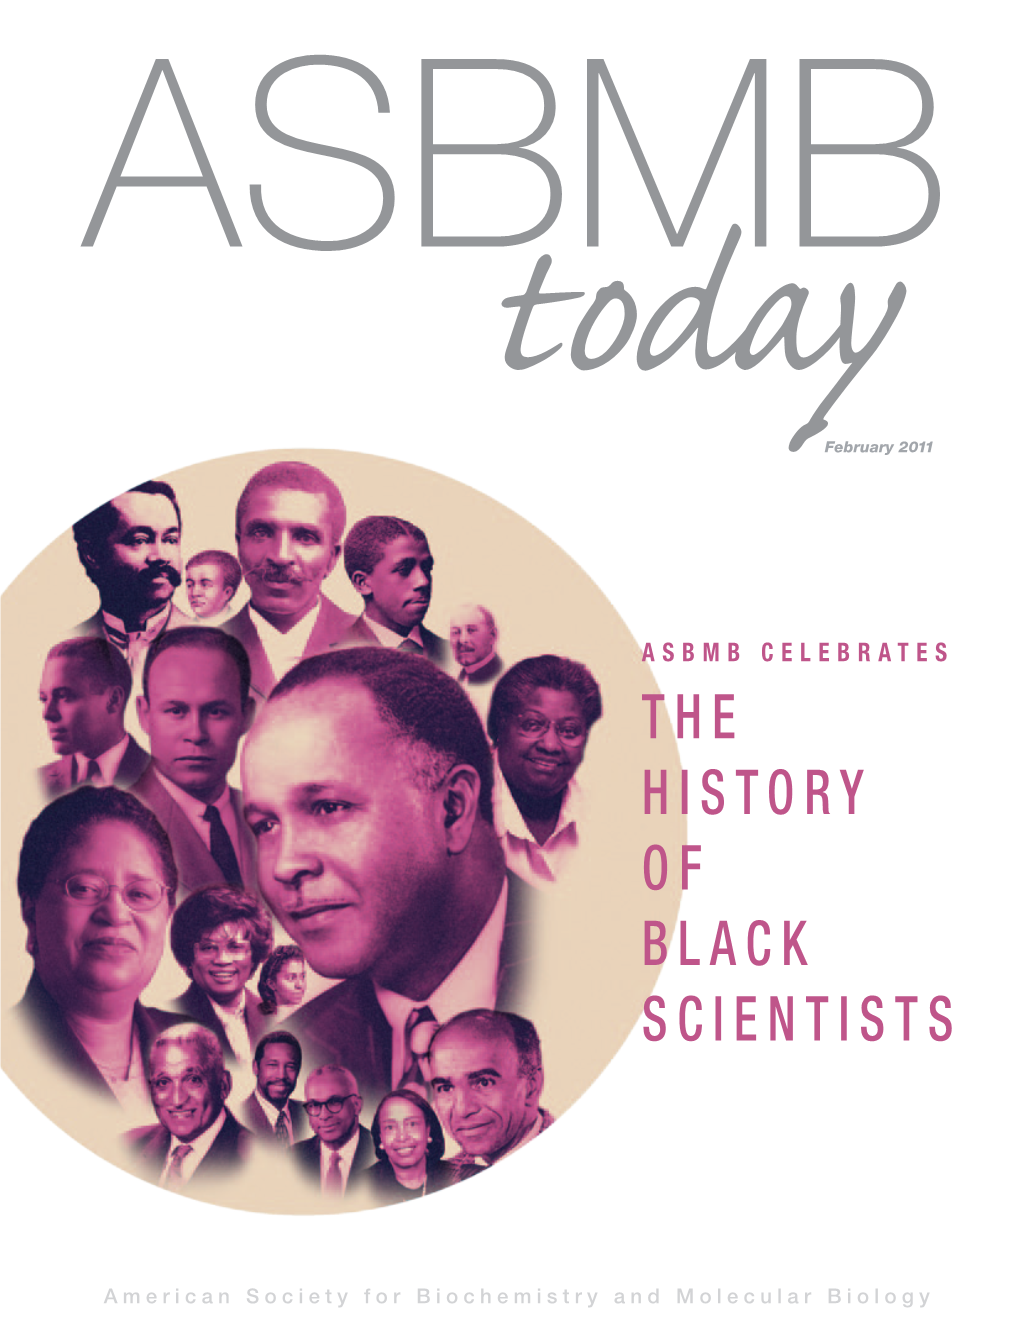 The History of Black Scientists